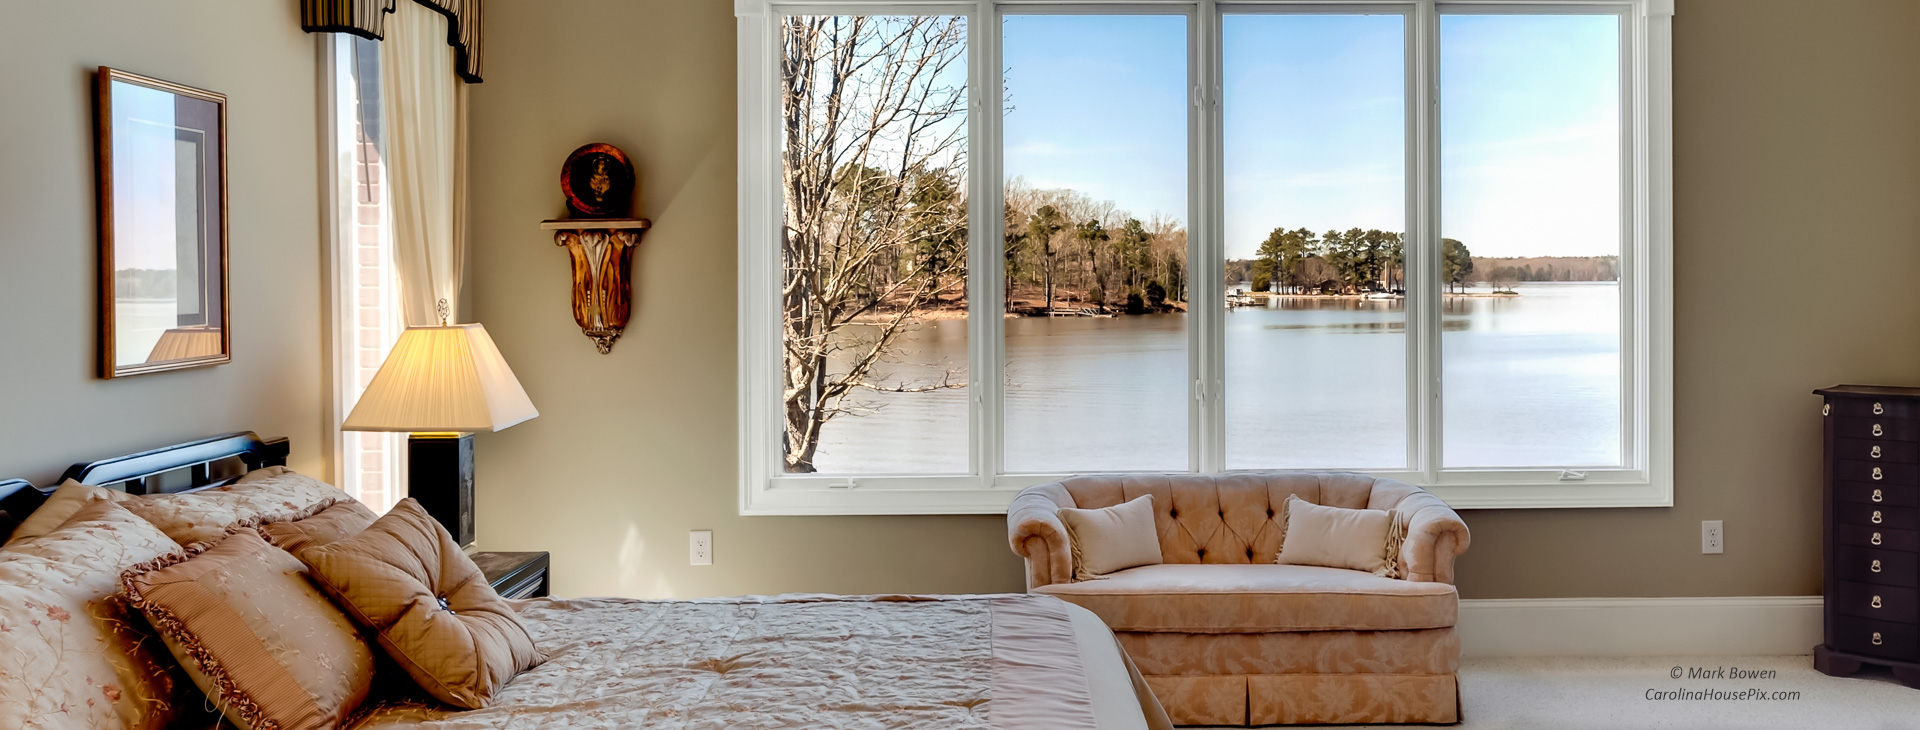 master bedroom with a view - Professionally crafted real estate photography by CarolinaHousePix.com in Columbia SC by Mark Bowen